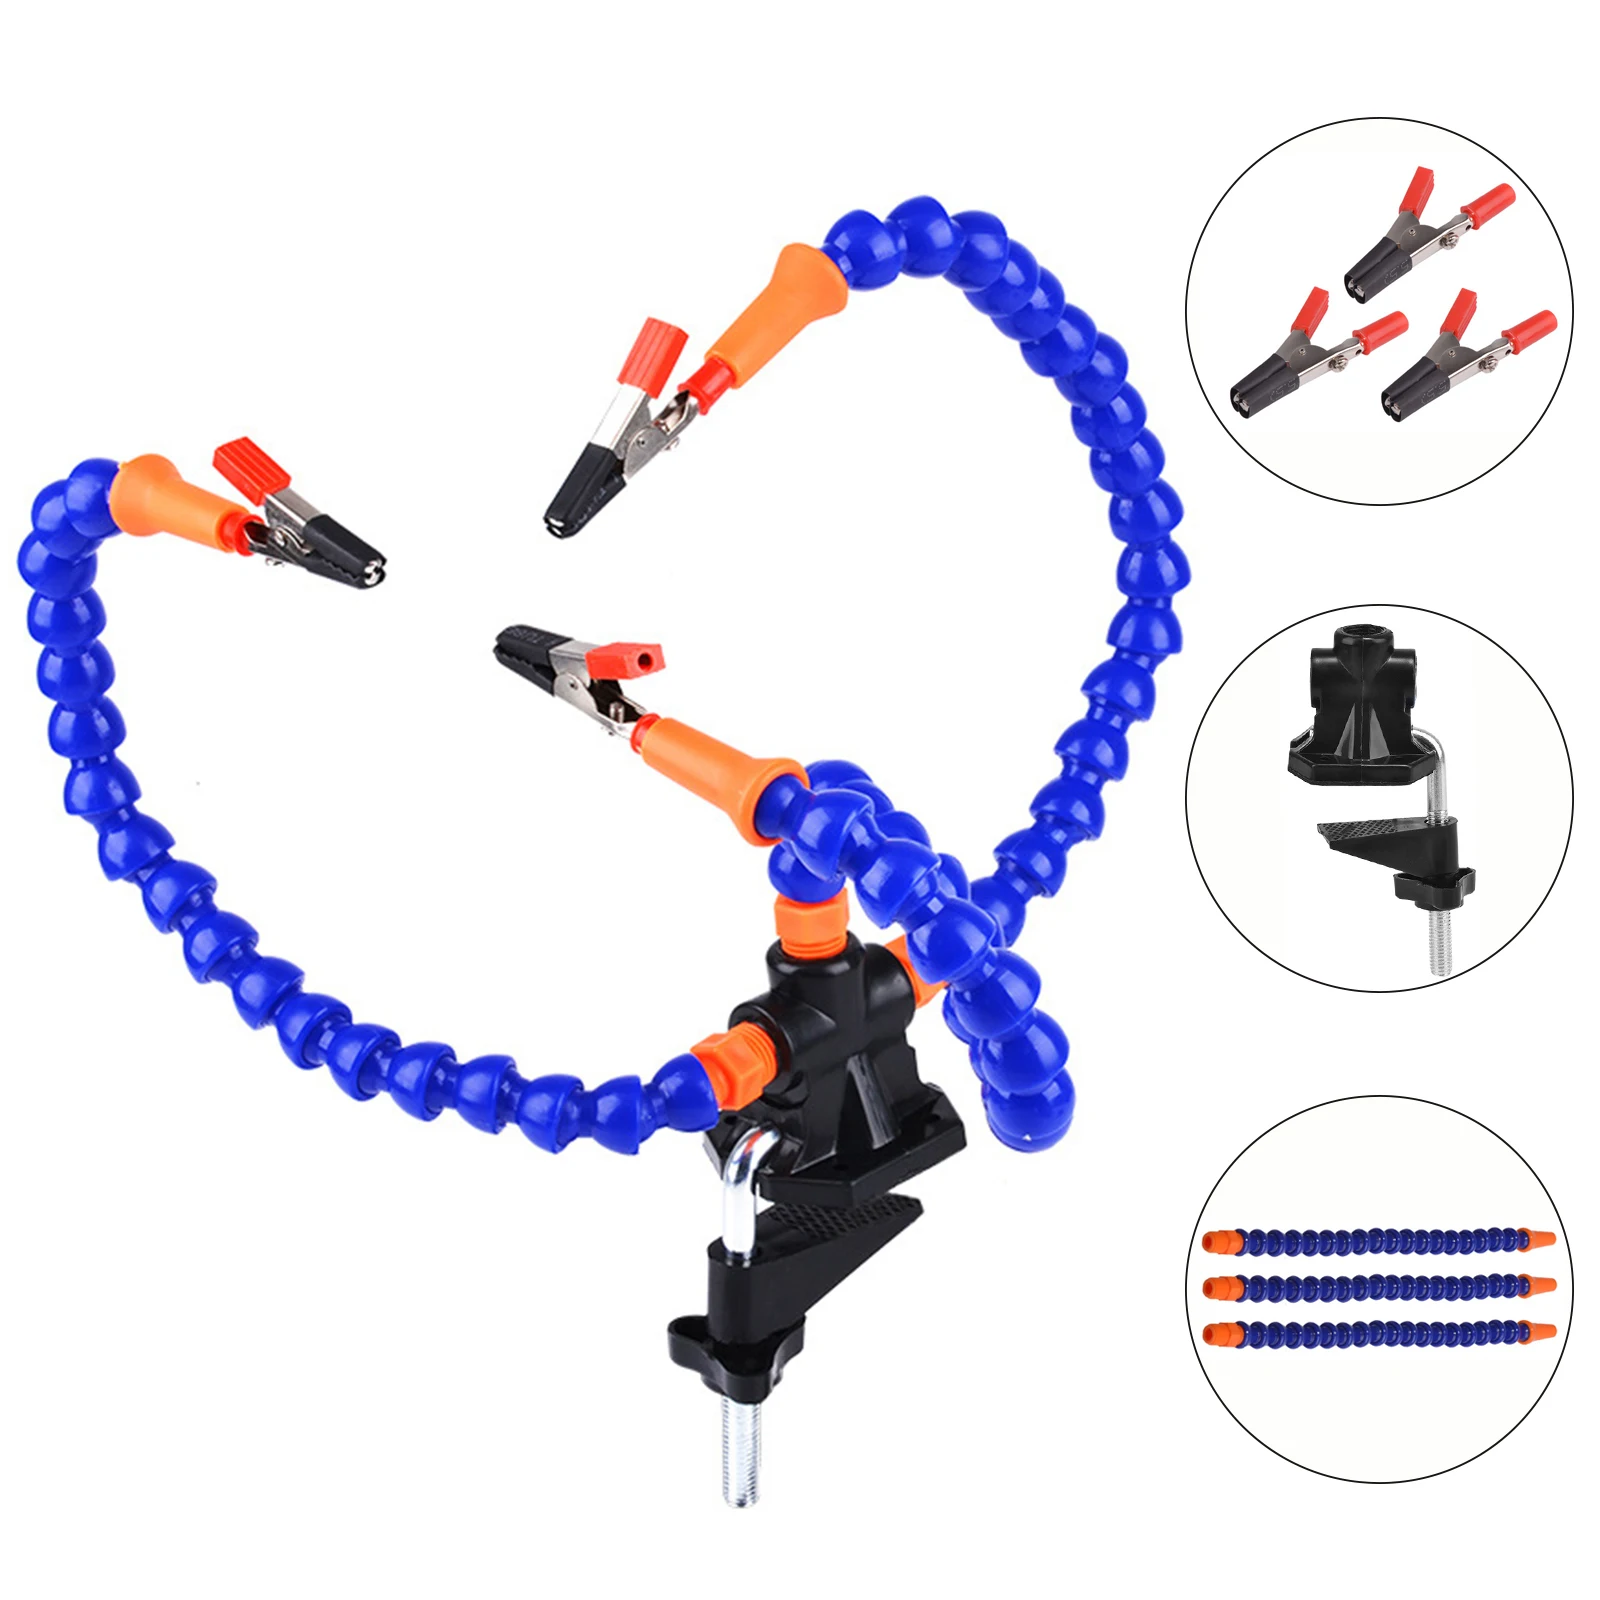 hot air station Table Clamp Soldering Station With 3 Flexible Arms Soldering Iron Holder PCB Welding Repair Tools Vise Hand Welding Station electric soldering iron kit